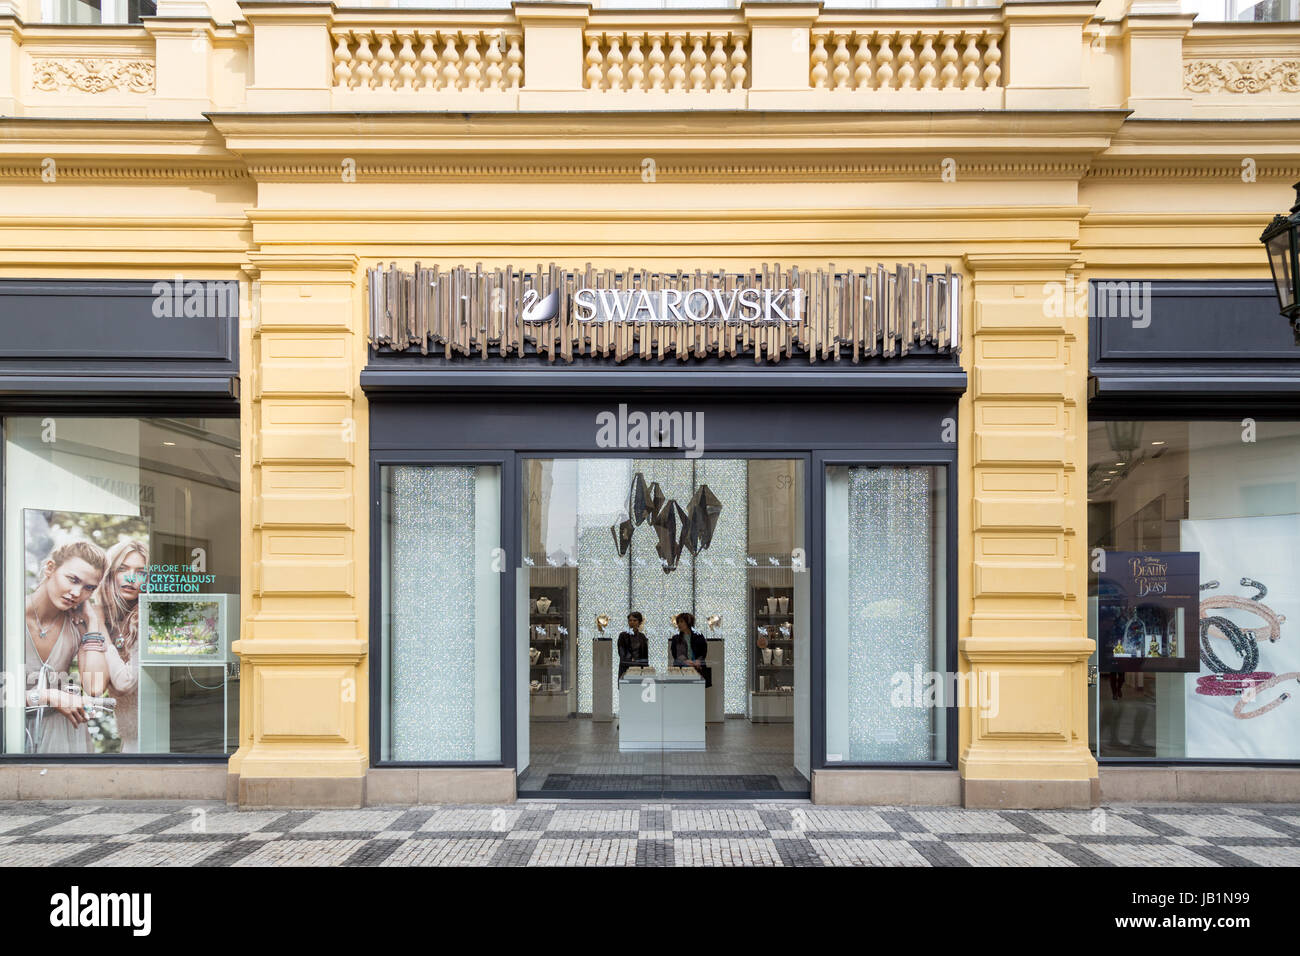 Prague Jewellery Shop High Resolution Stock Photography and Images - Alamy